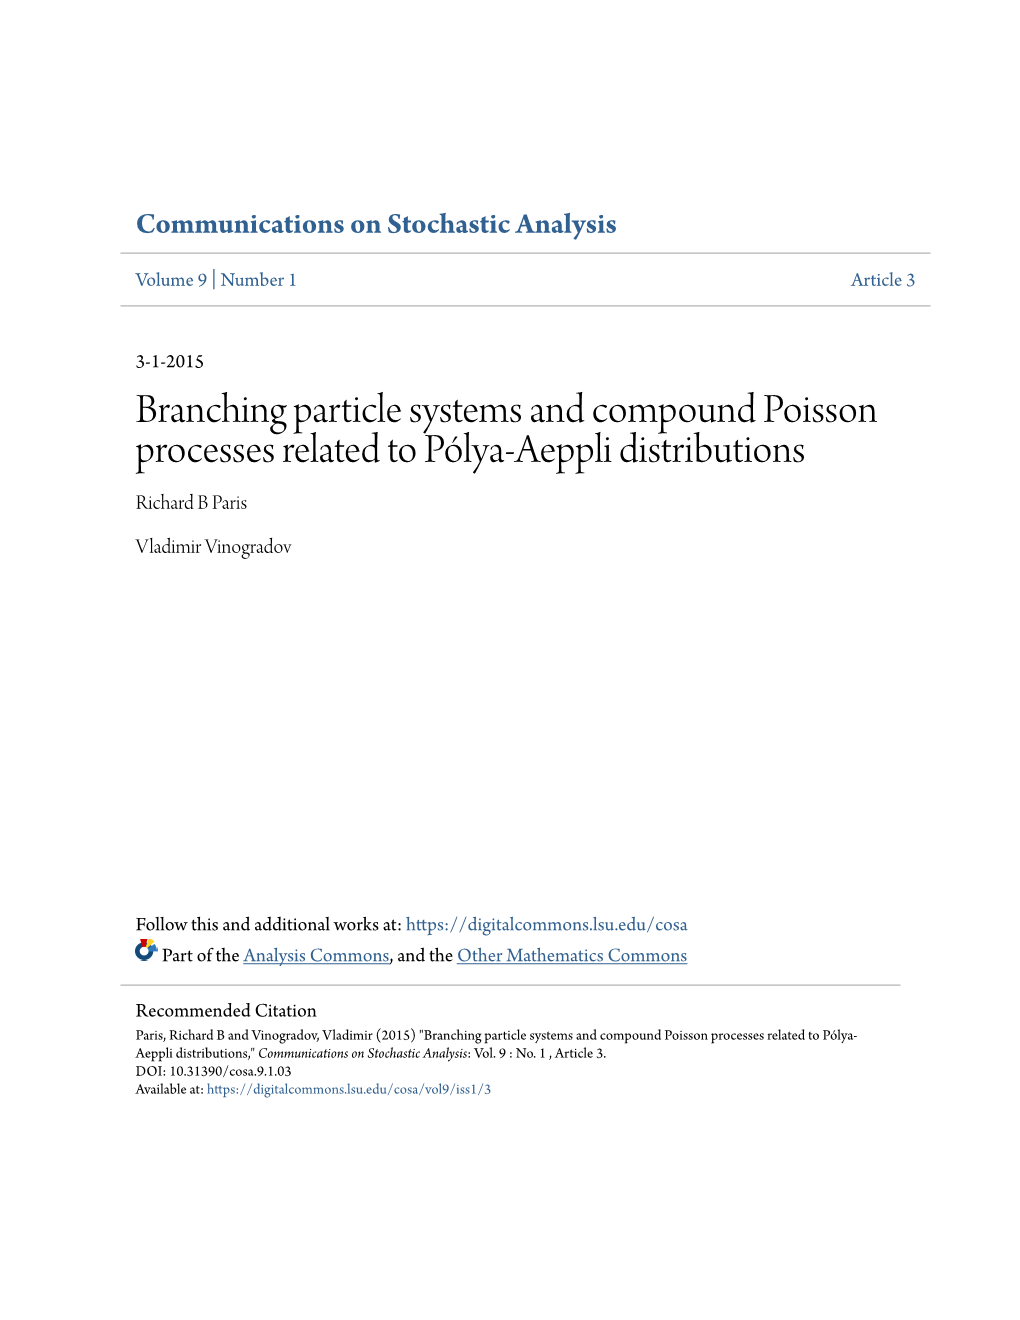 Branching Particle Systems and Compound Poisson Processes Related to Pólya-Aeppli Distributions Richard B Paris